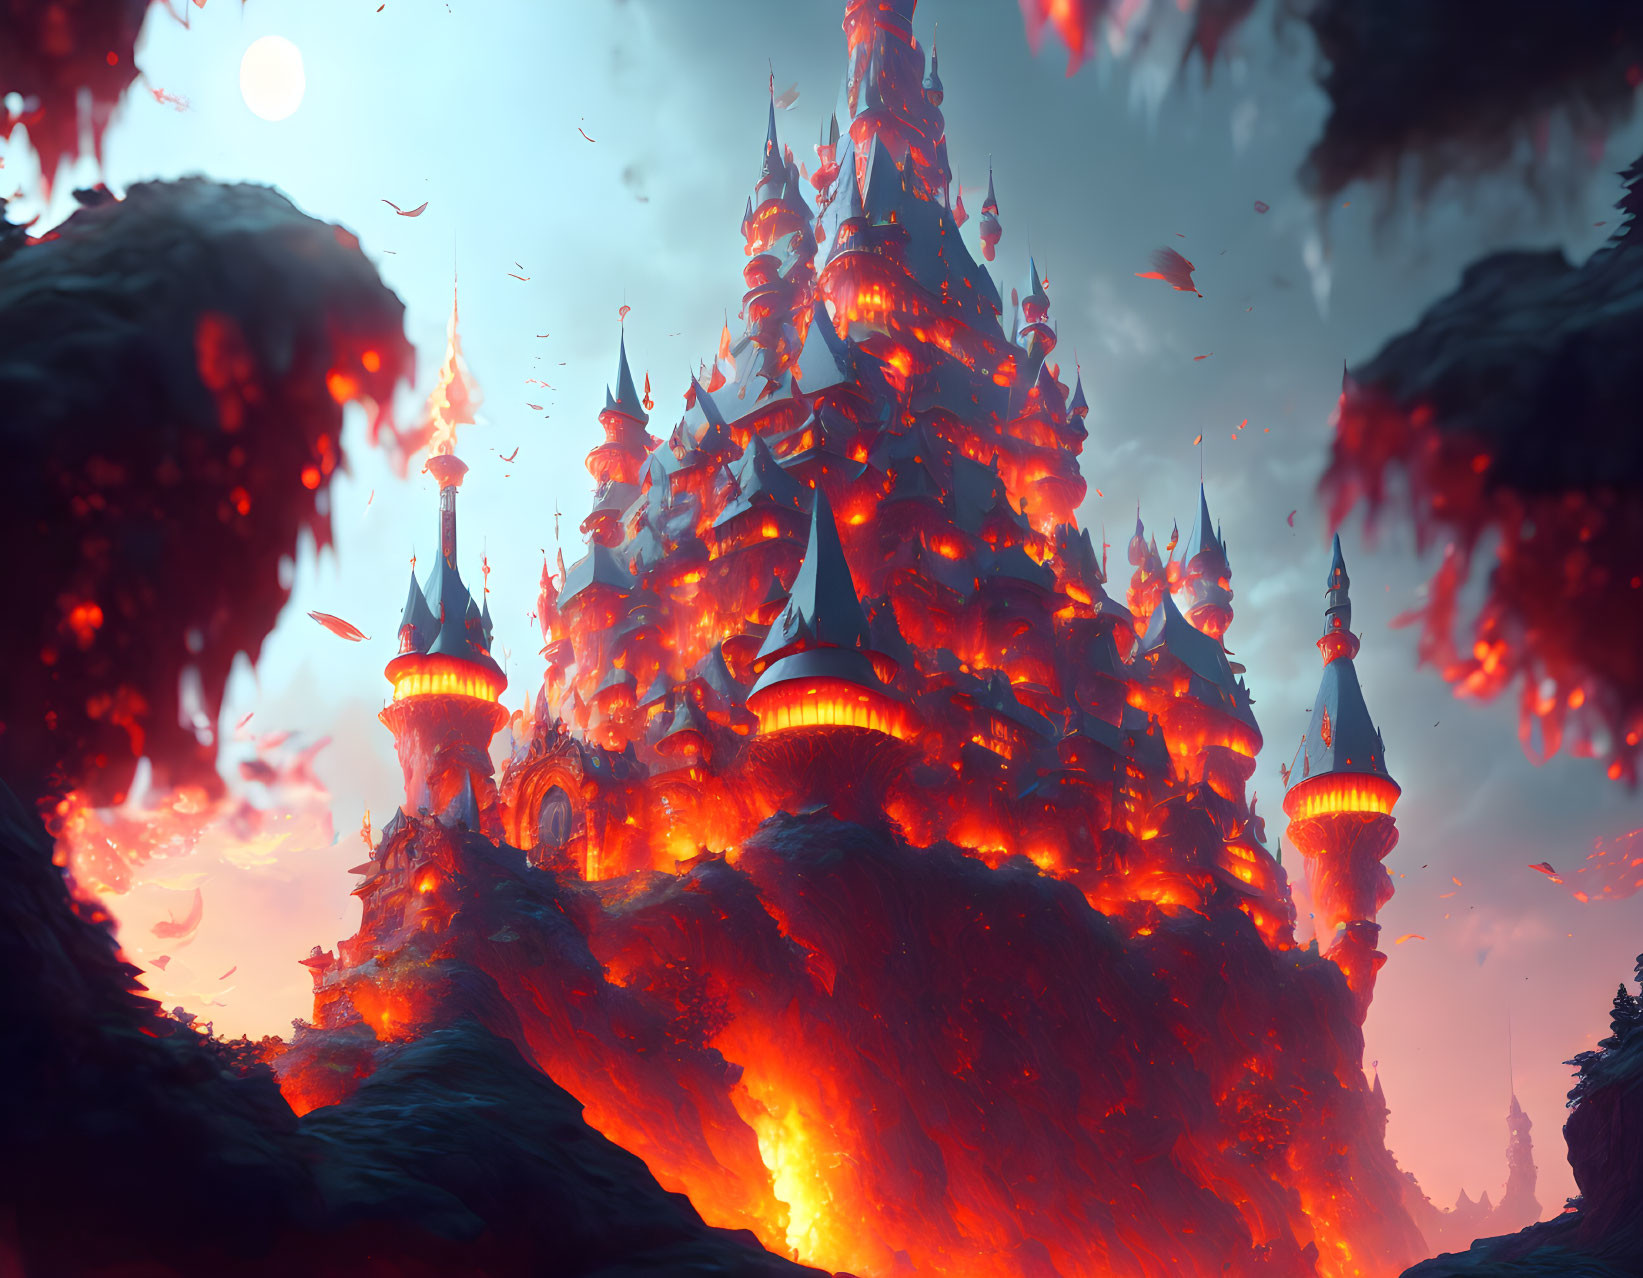 Fantastical lava castle with spires and towers in red sky scenery